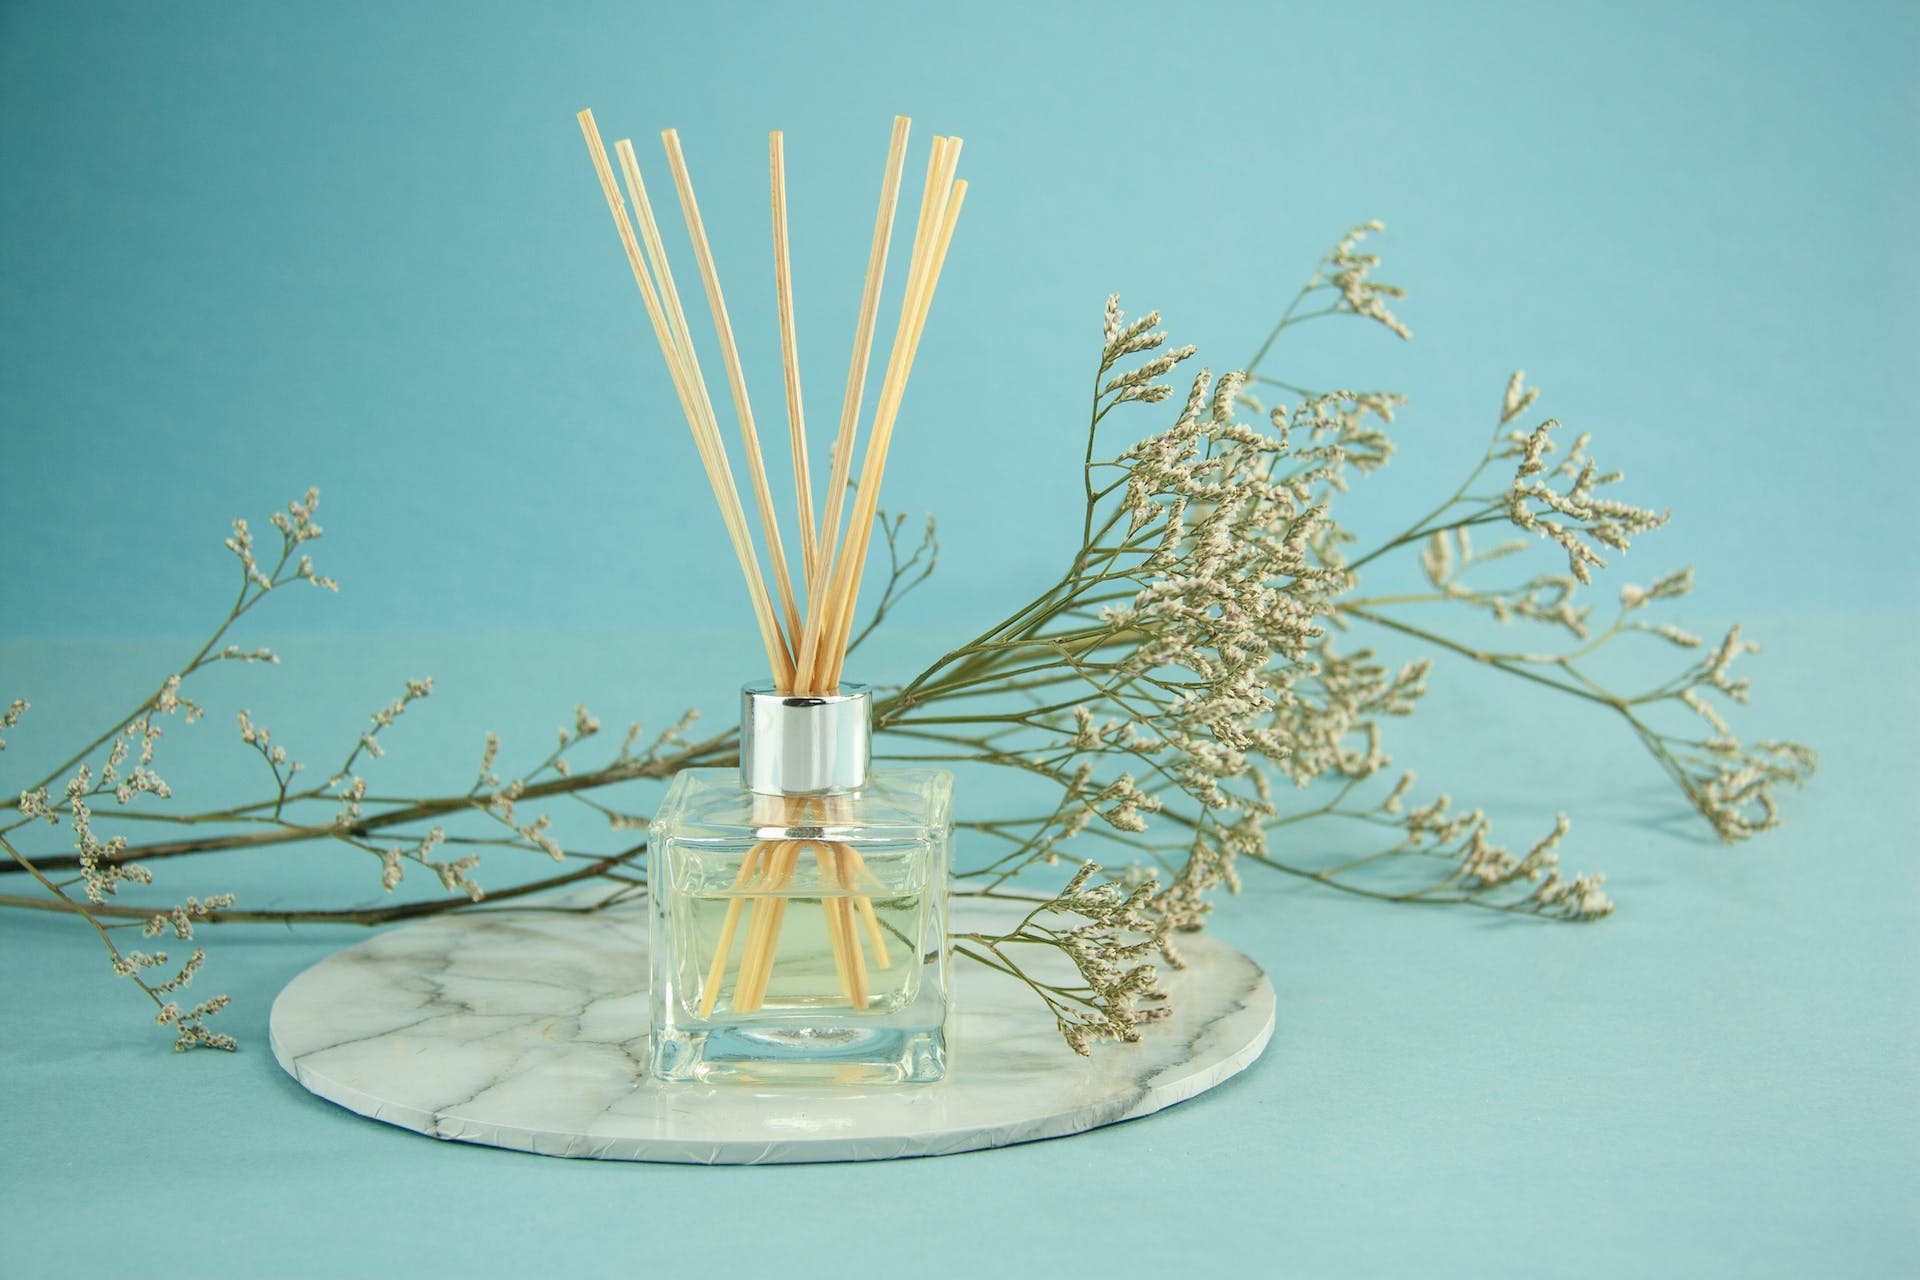 Glass of natural essential oil with sticks, with a white plant and blue background